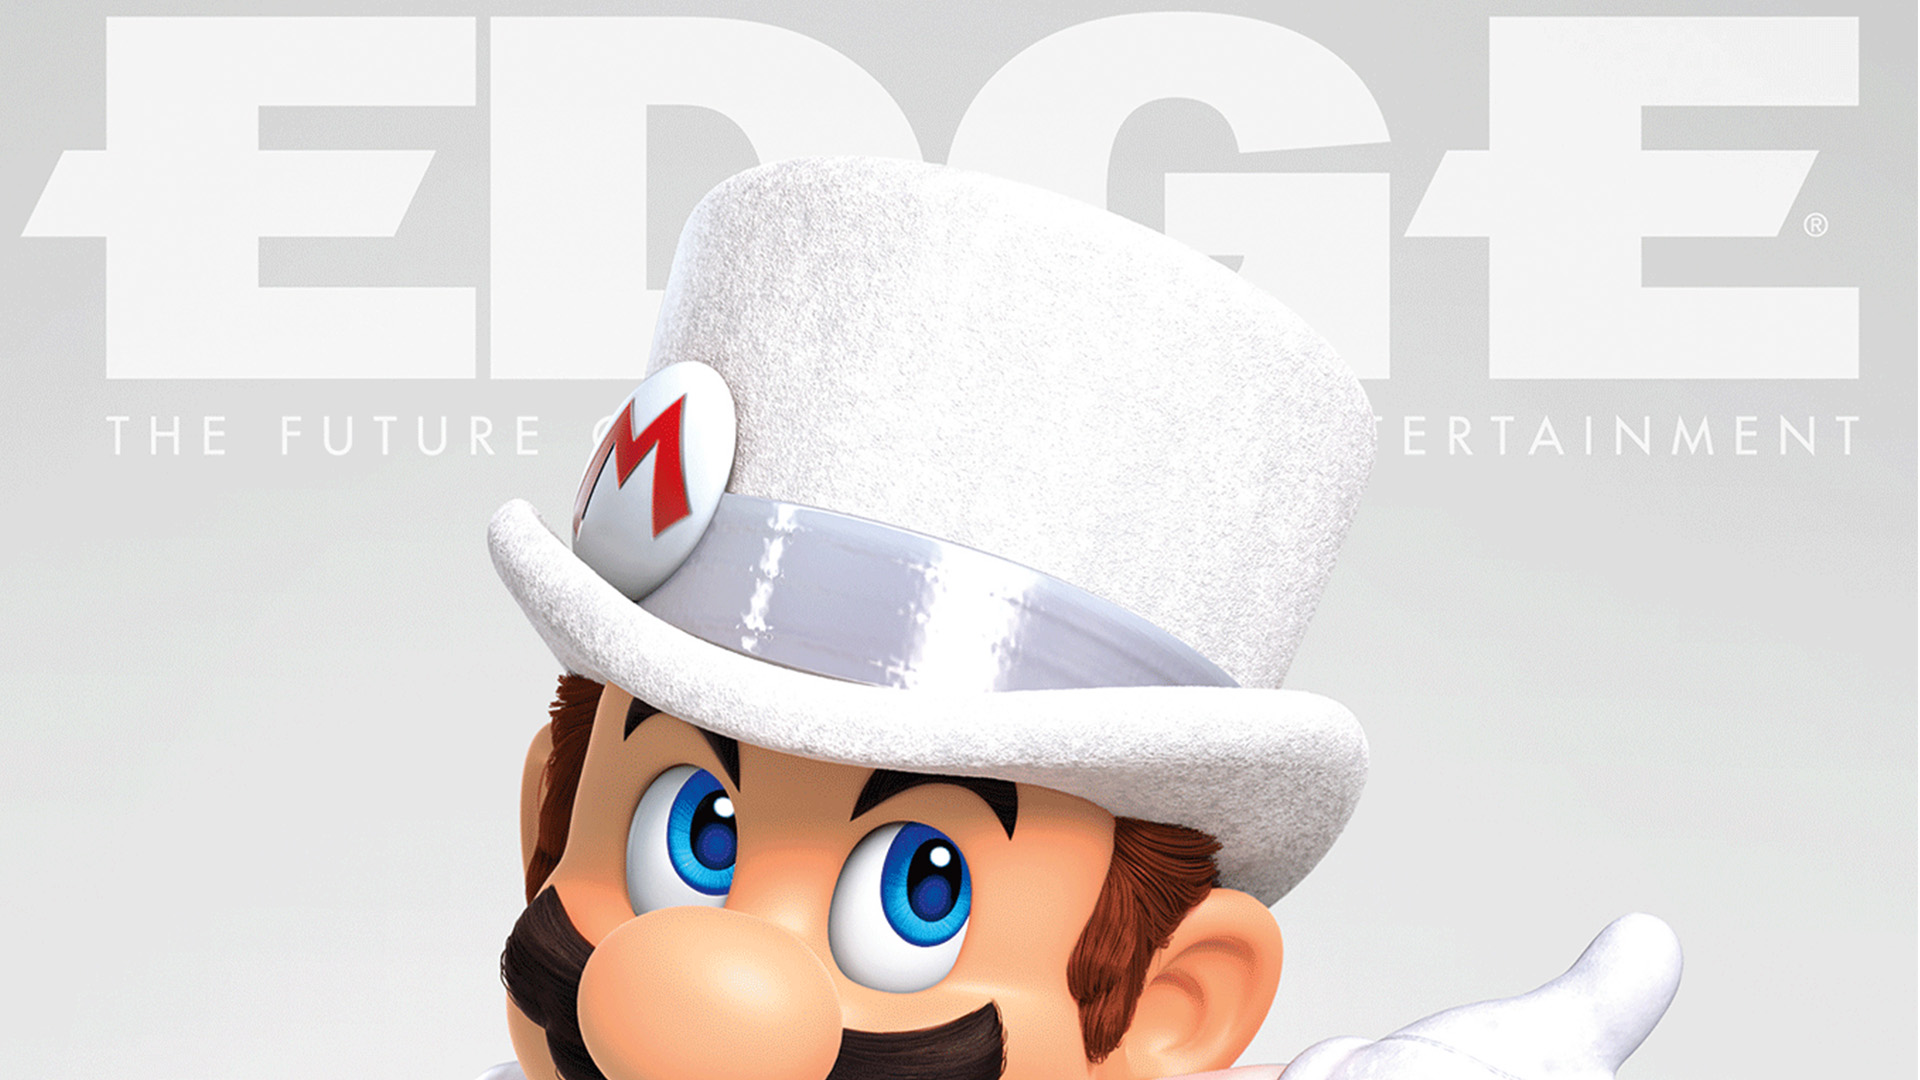 Metacritic - SUPER MARIO ODYSSEY comes out of the gates with a RARE perfect  10 score from EDGE Magazine - a tough grader to say the least: Mario  might be getting on